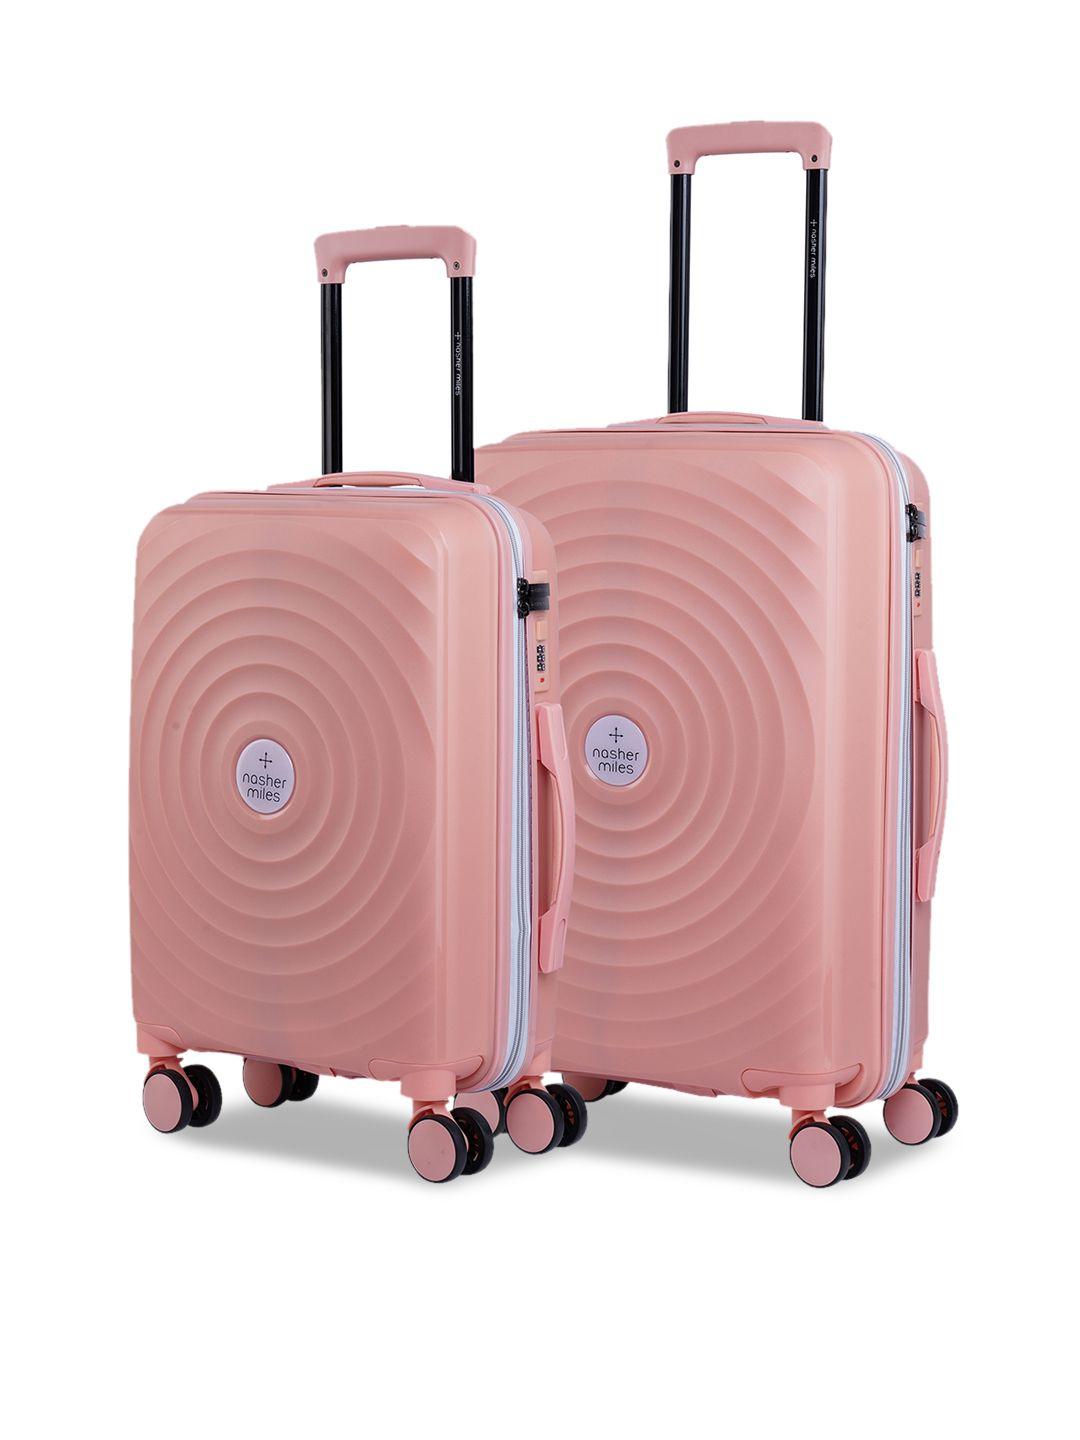 nasher miles set of 2 goa textured hard-sided trolley bags- 55 cm & 65 cm